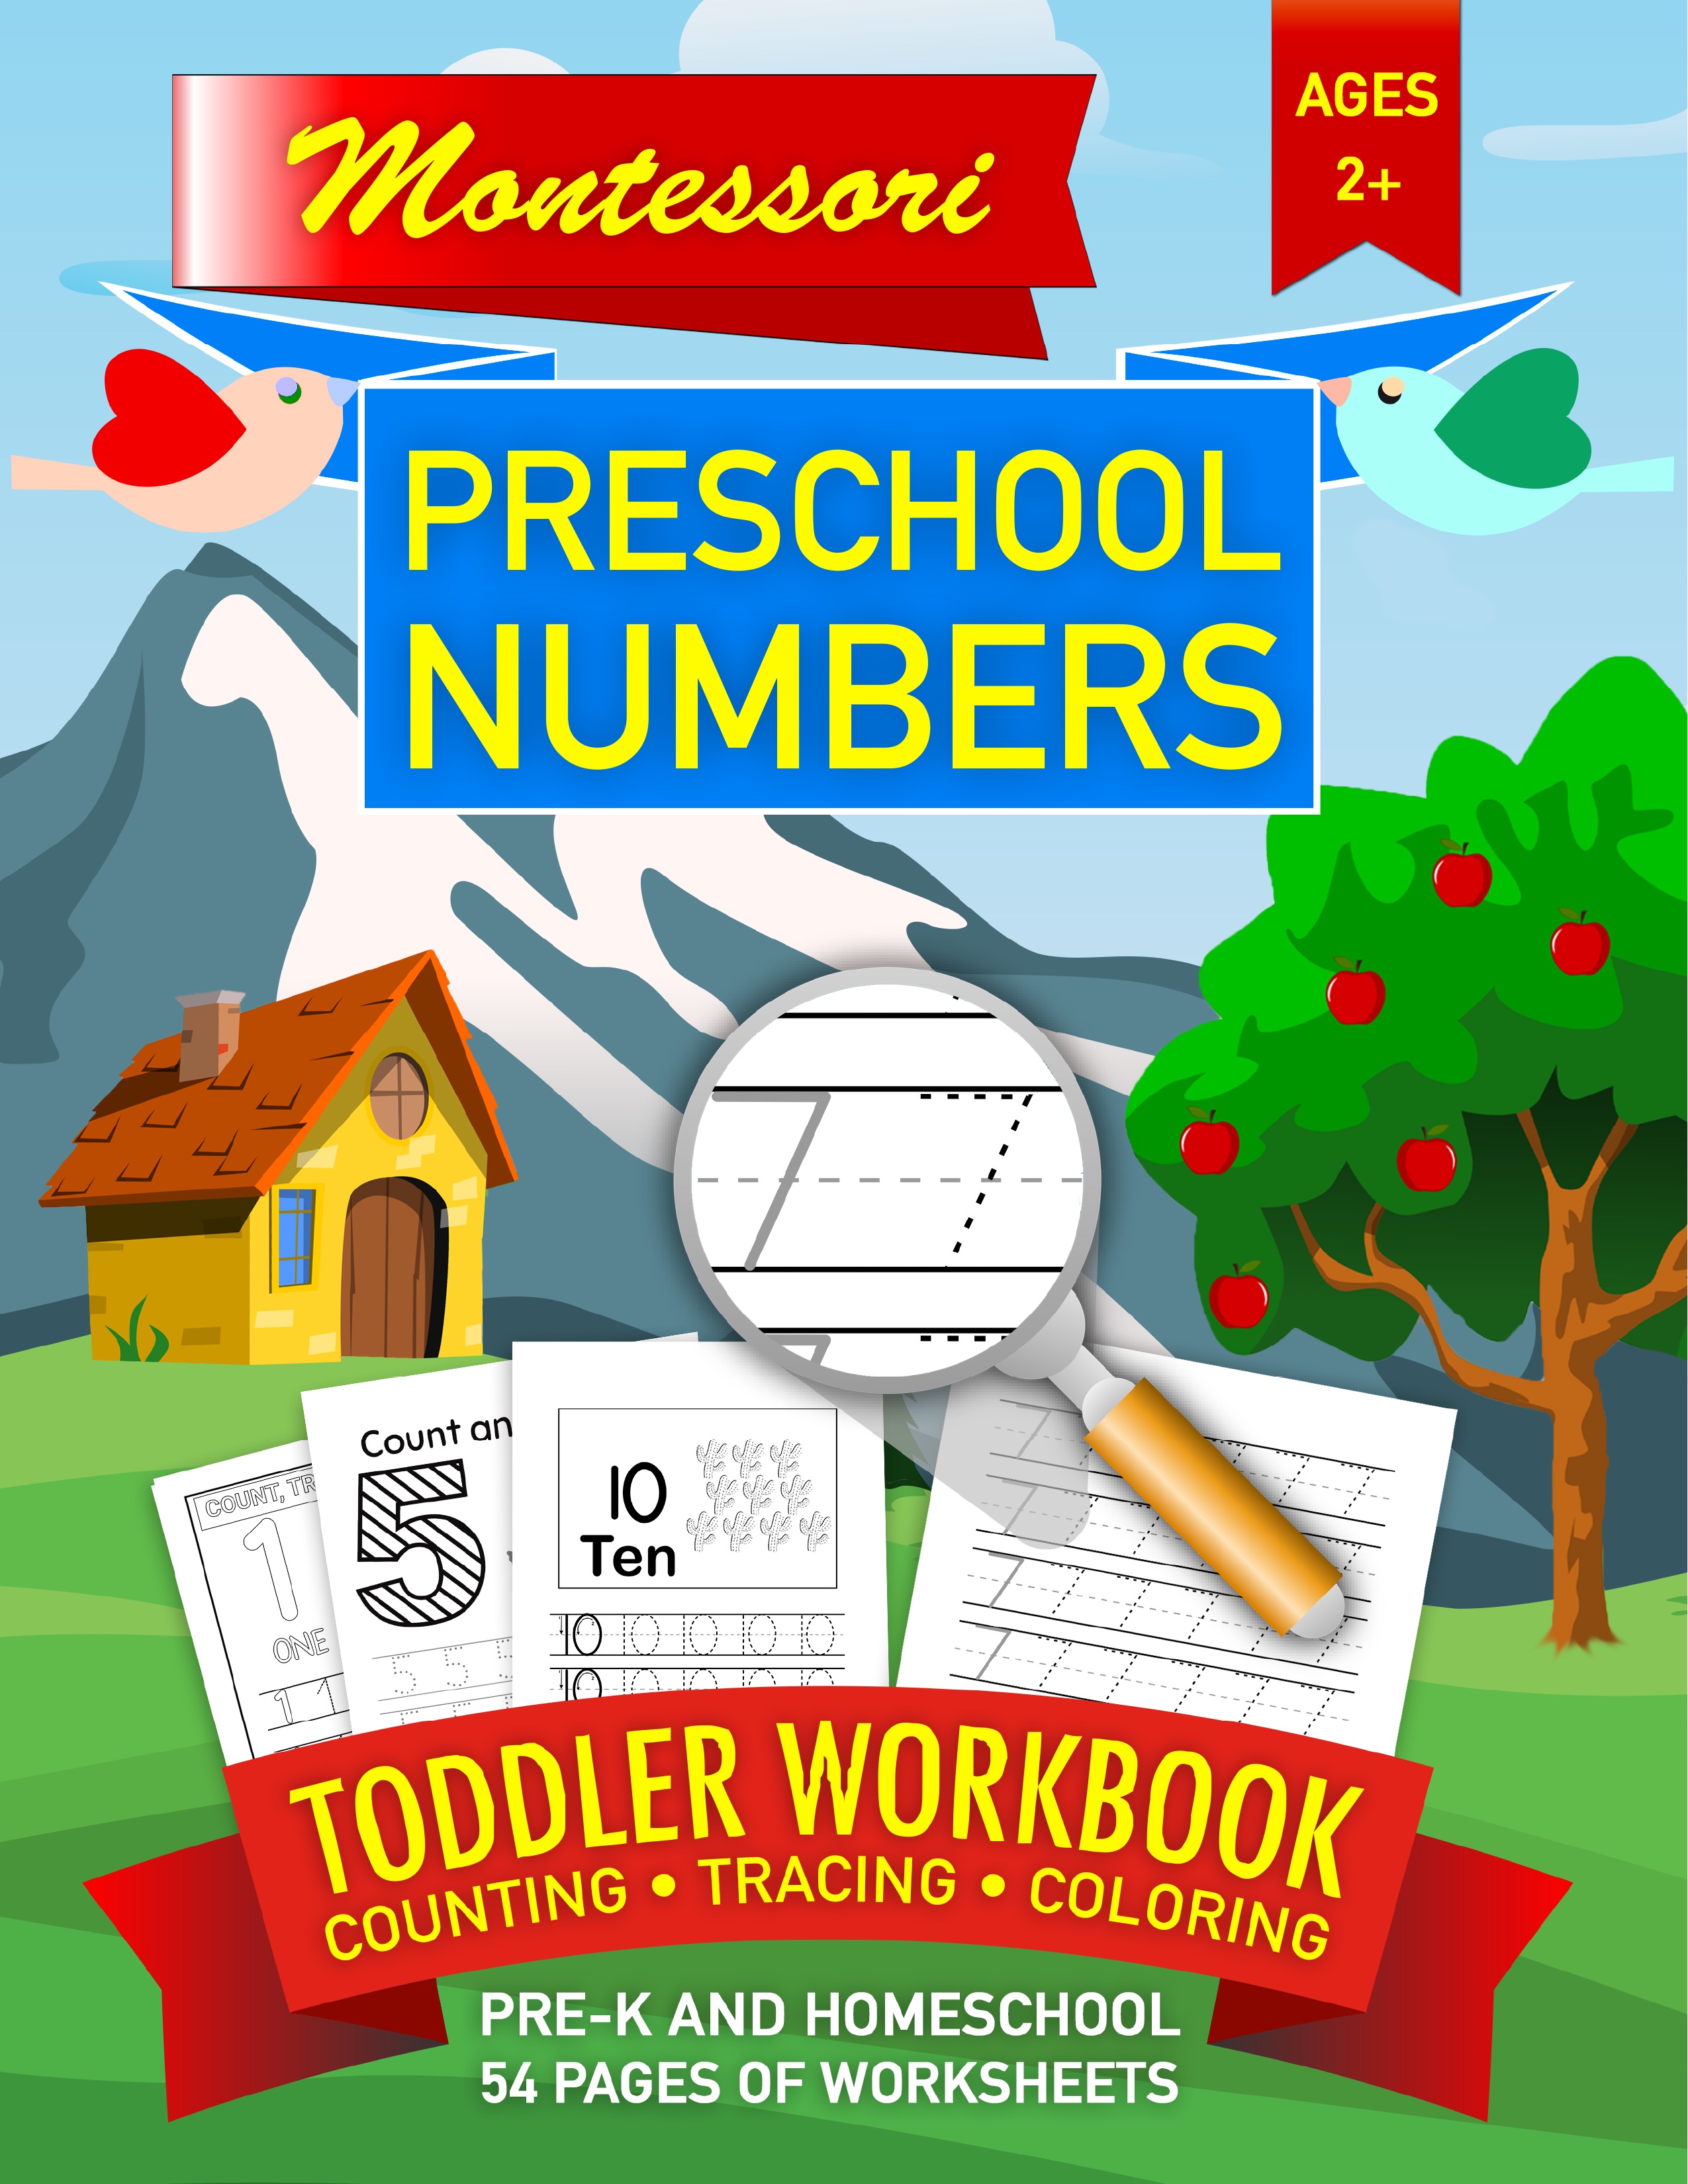 Montessori Workbook • Toddler Preschool Tracing Numbers • Pre-K and Homeschool • Counting • Coloring: Learn to Trace & Count Worksheets for School Workbooks For Preschool